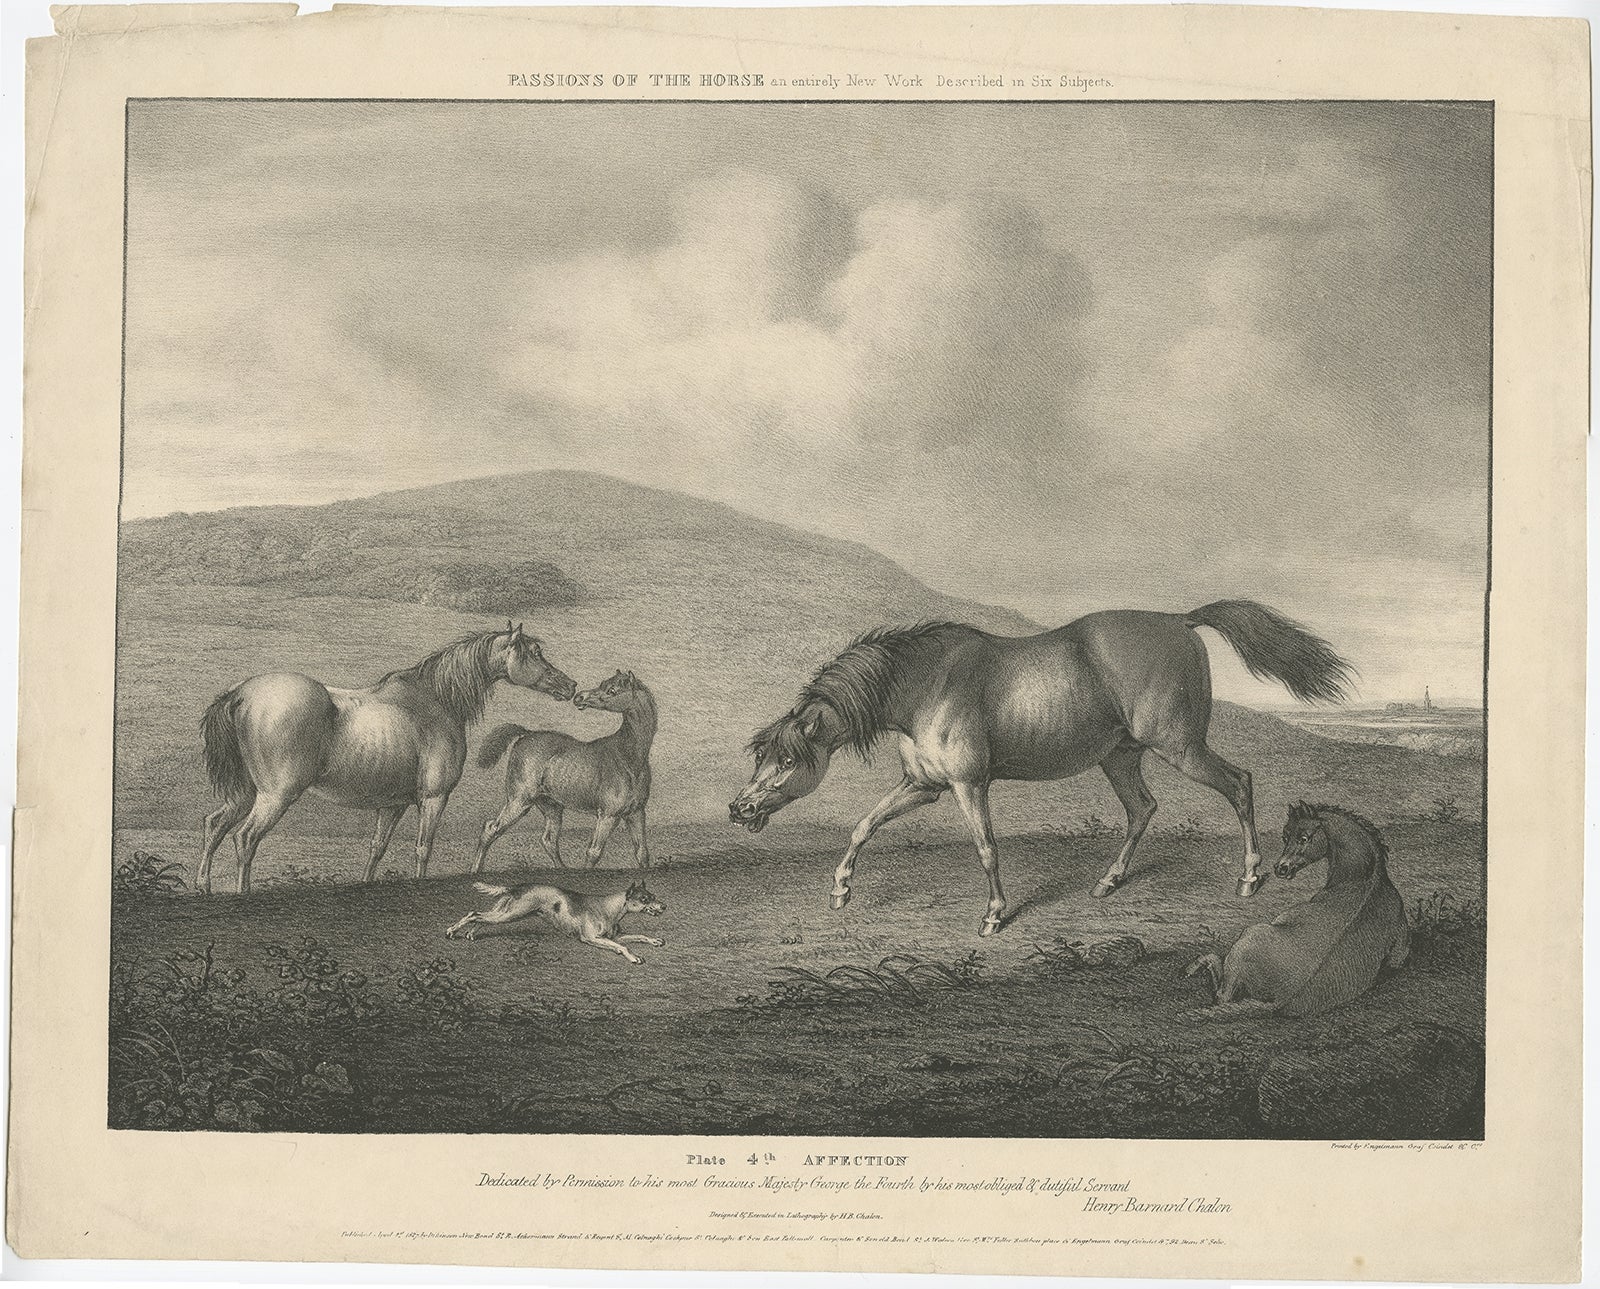 Antique horse print titled 'Plate 4th Affection, dedicated by permission to his most Gracious Majesty George the Fourth (..)'. 

Artists and Engravers: In 1827, British artist Henry Barnard Chalon (1770-1849), designed and lithographed a portfolio